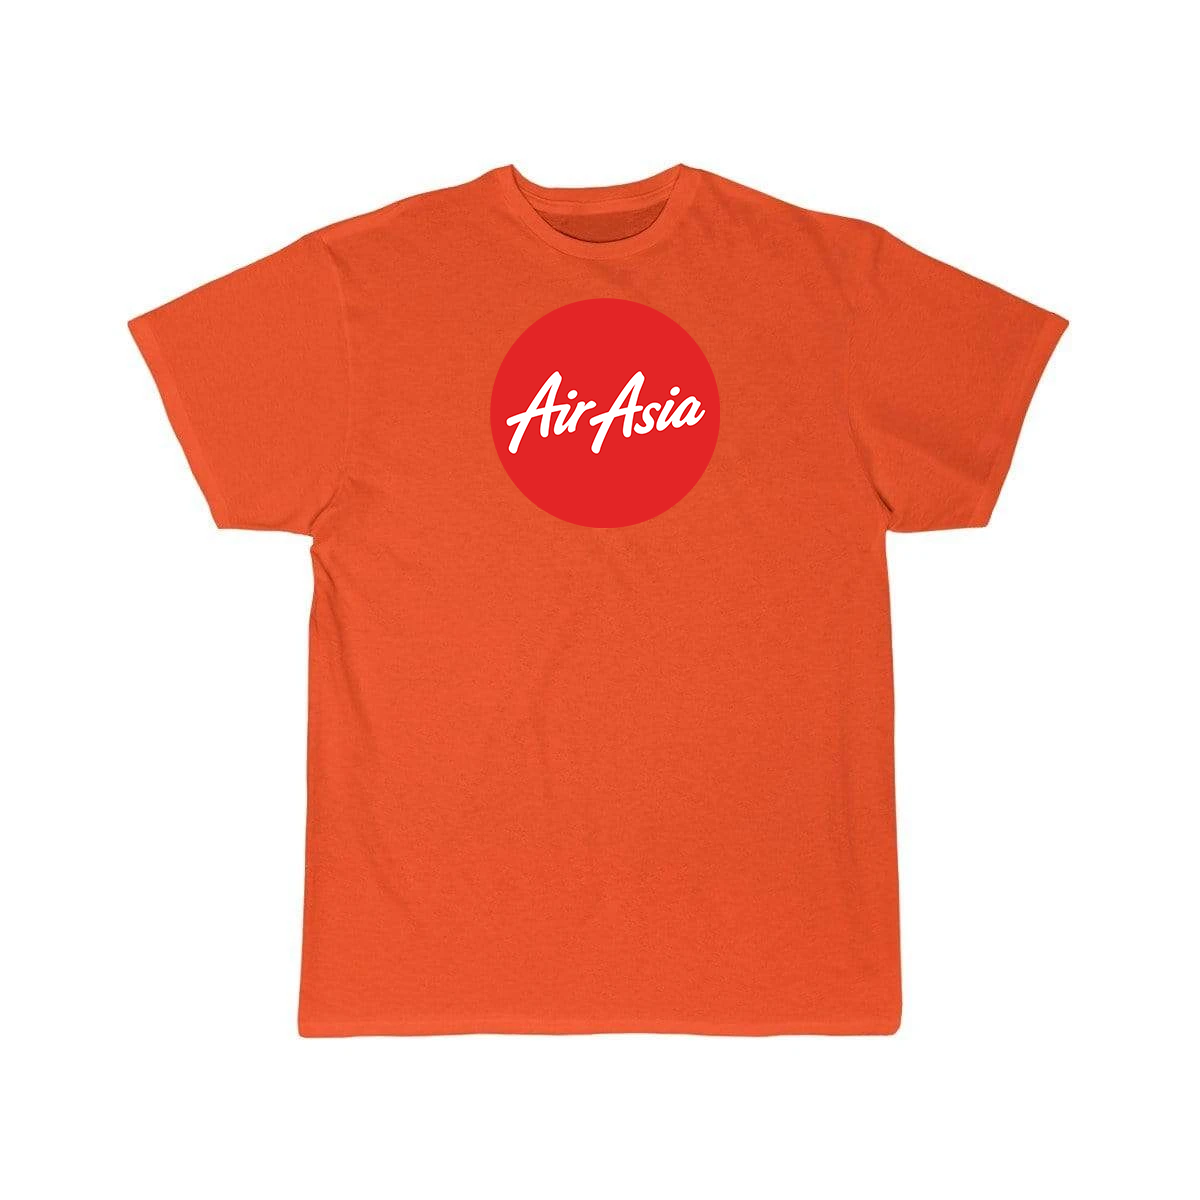 ASIA AIRLINE T-SHIRT